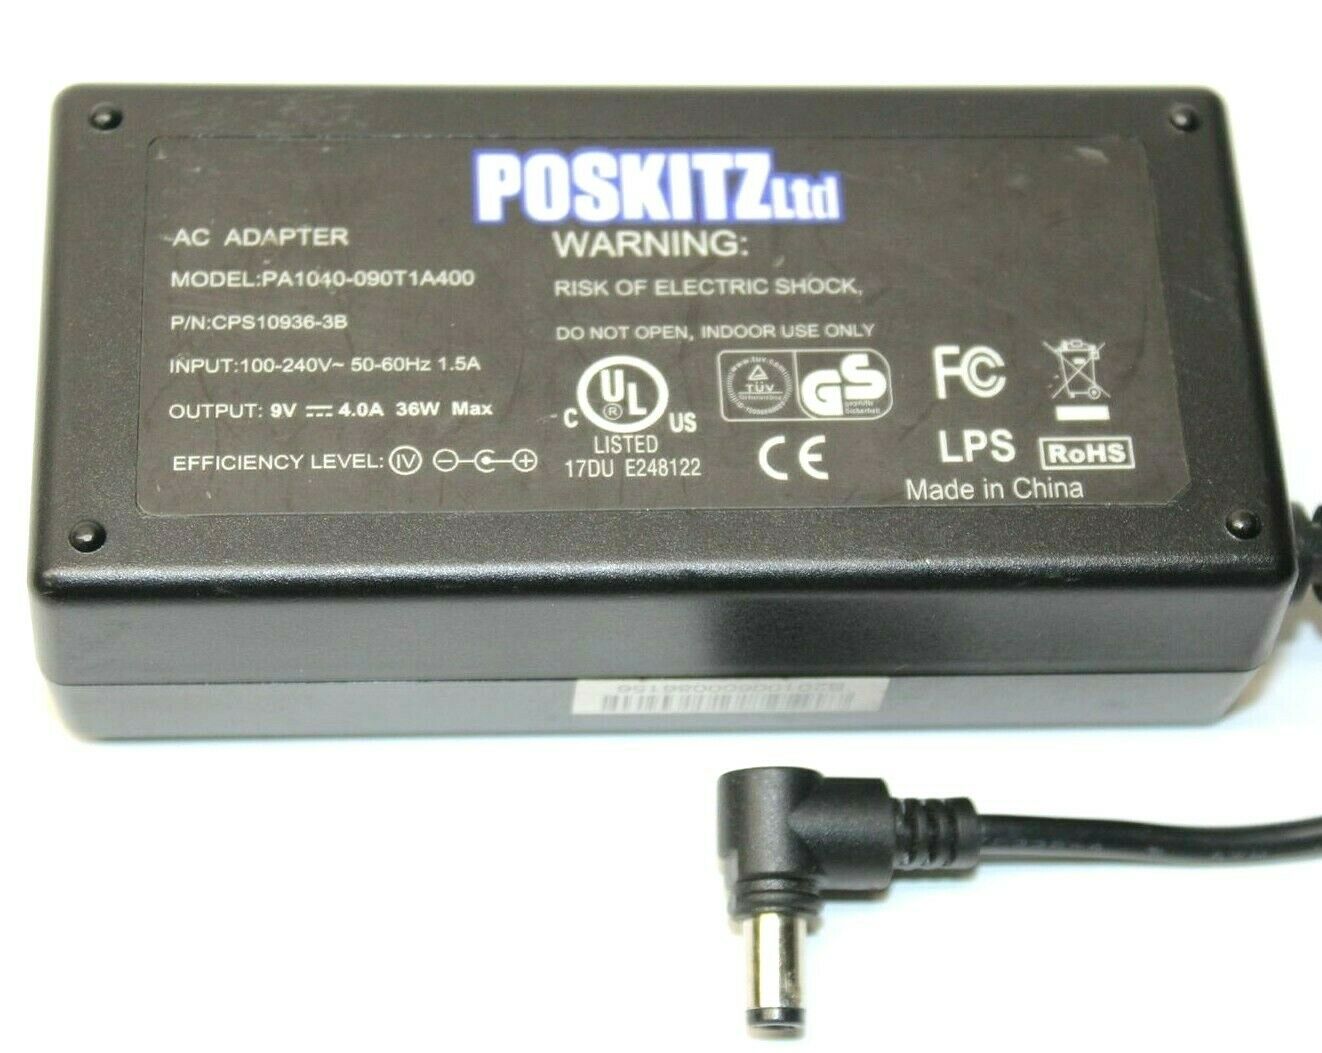 New 9V 4A Poskitz PA1040-090T1A400 CPS10936-3B Power Supply Ac Adapter